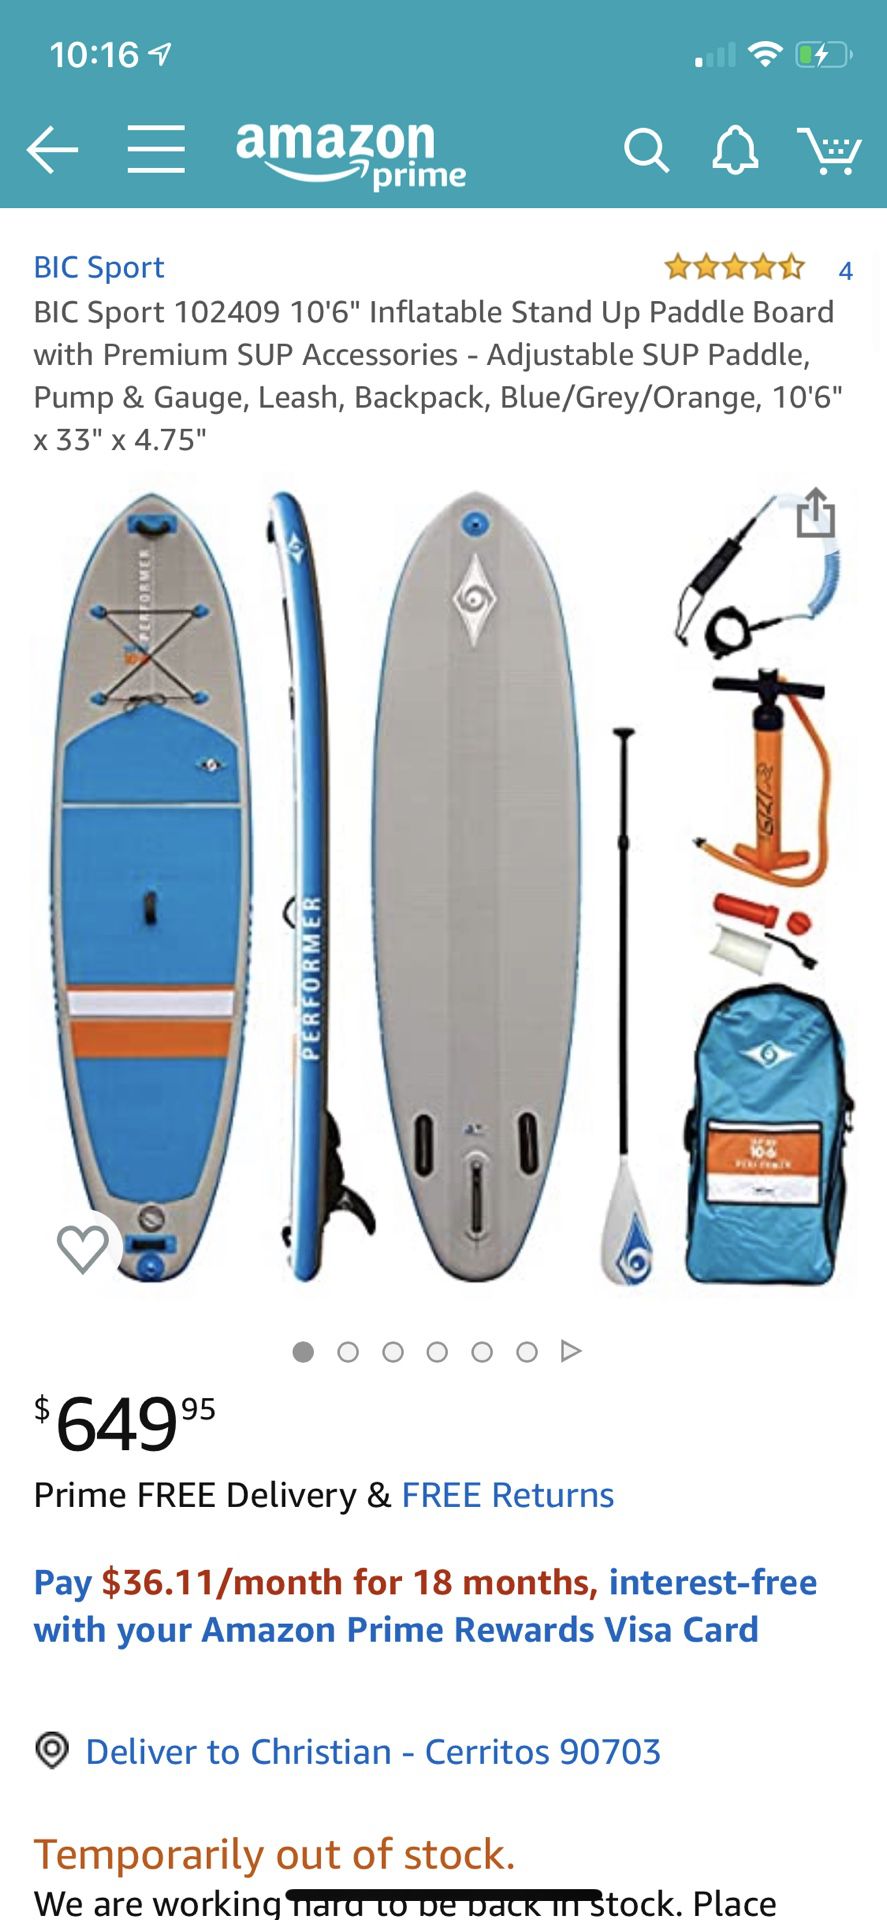 New Bic Sport stand up paddle board and accessories